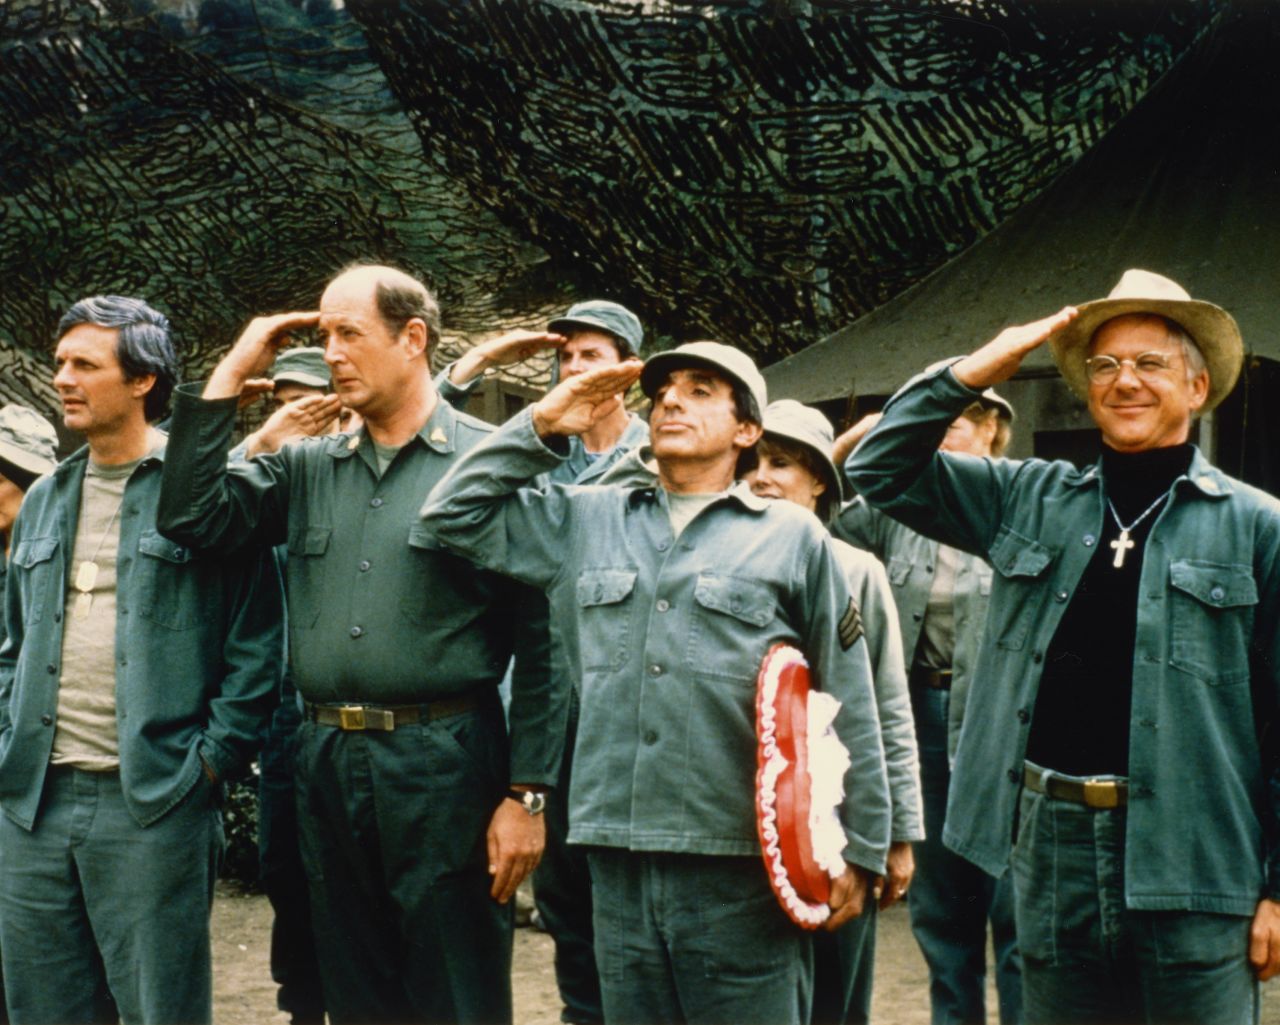 A record audience watched the tearjerker of a finale for "M*A*S*H" in 1983, as the Korean War ended and everyone prepared to go their separate ways.